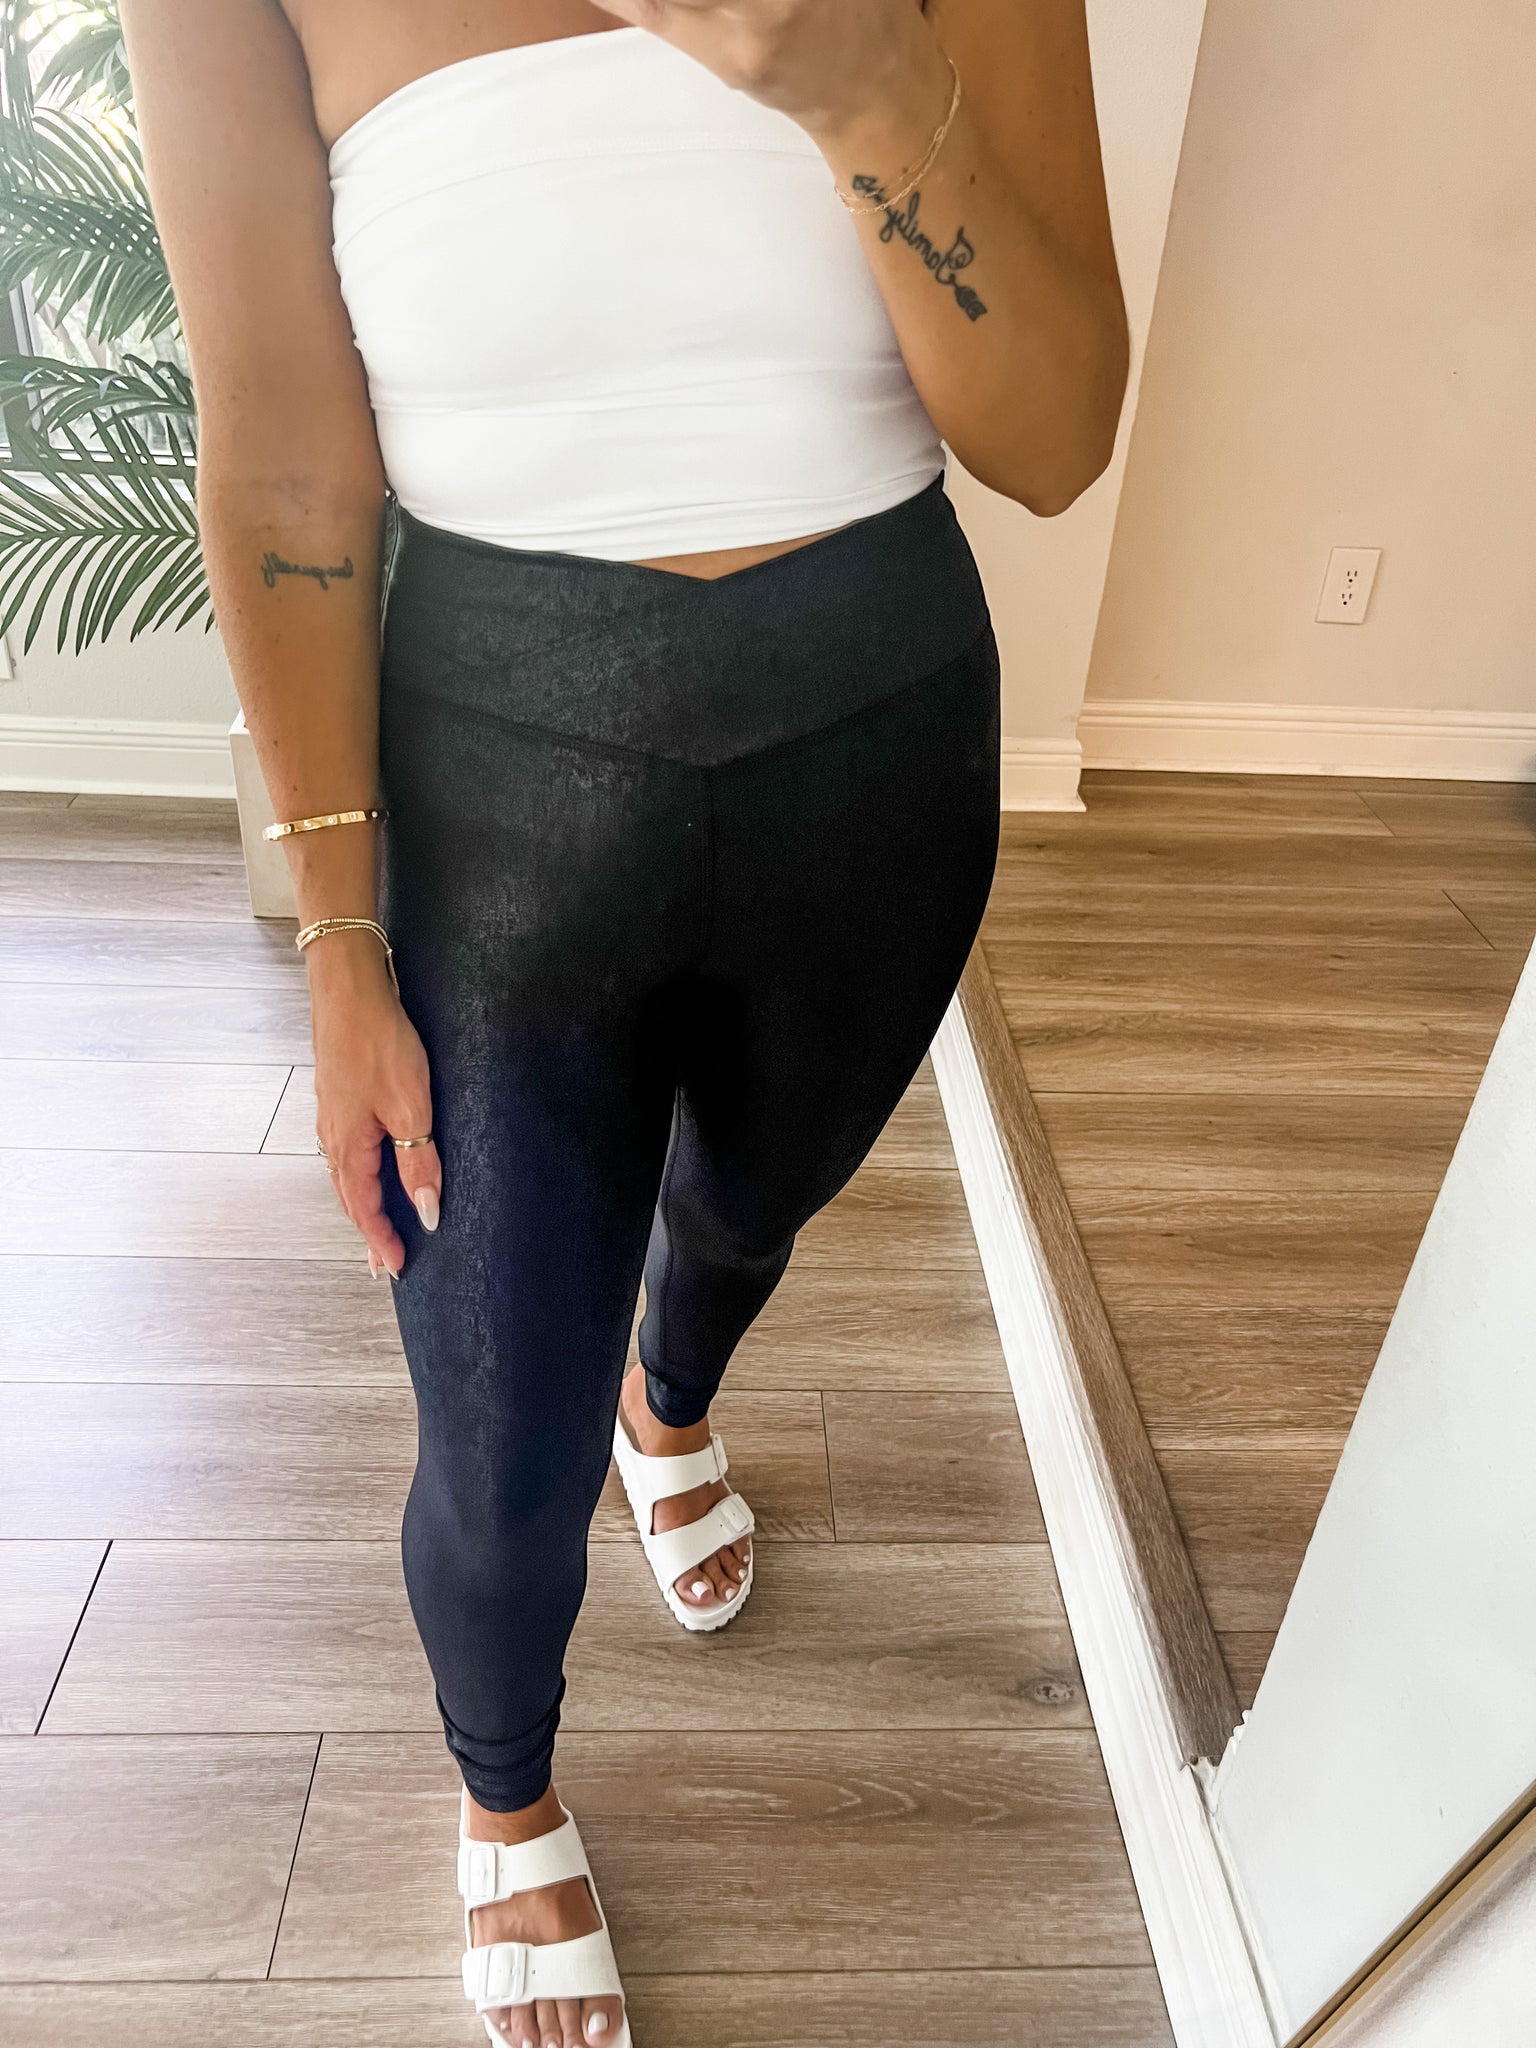 The Leather Look Crossover Leggings